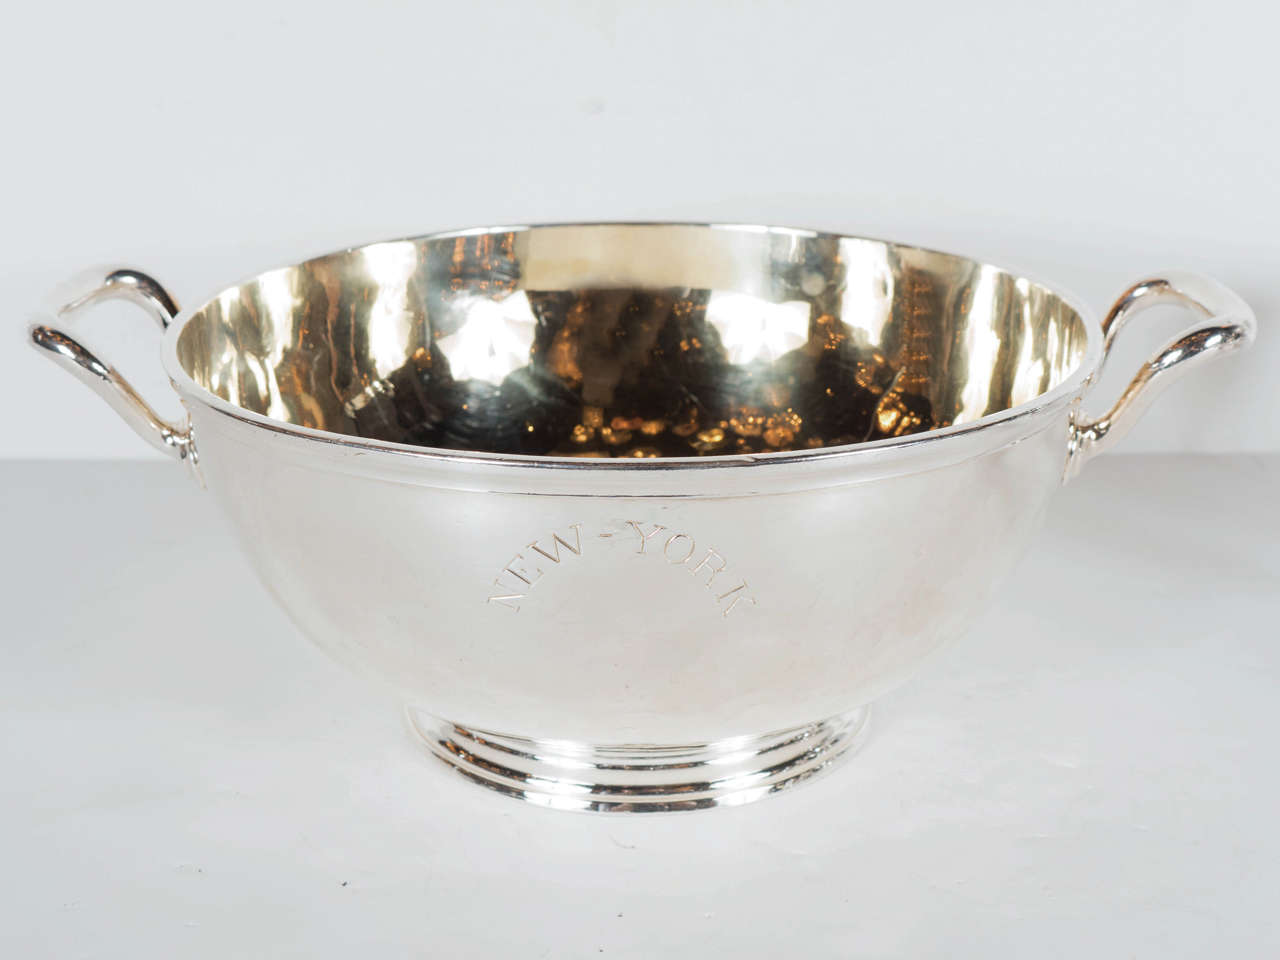 This stunning bowl is made of fine silver plate with a gilt interior. It features a two arm form with a concentric stepped base. It has an engraving on the front 